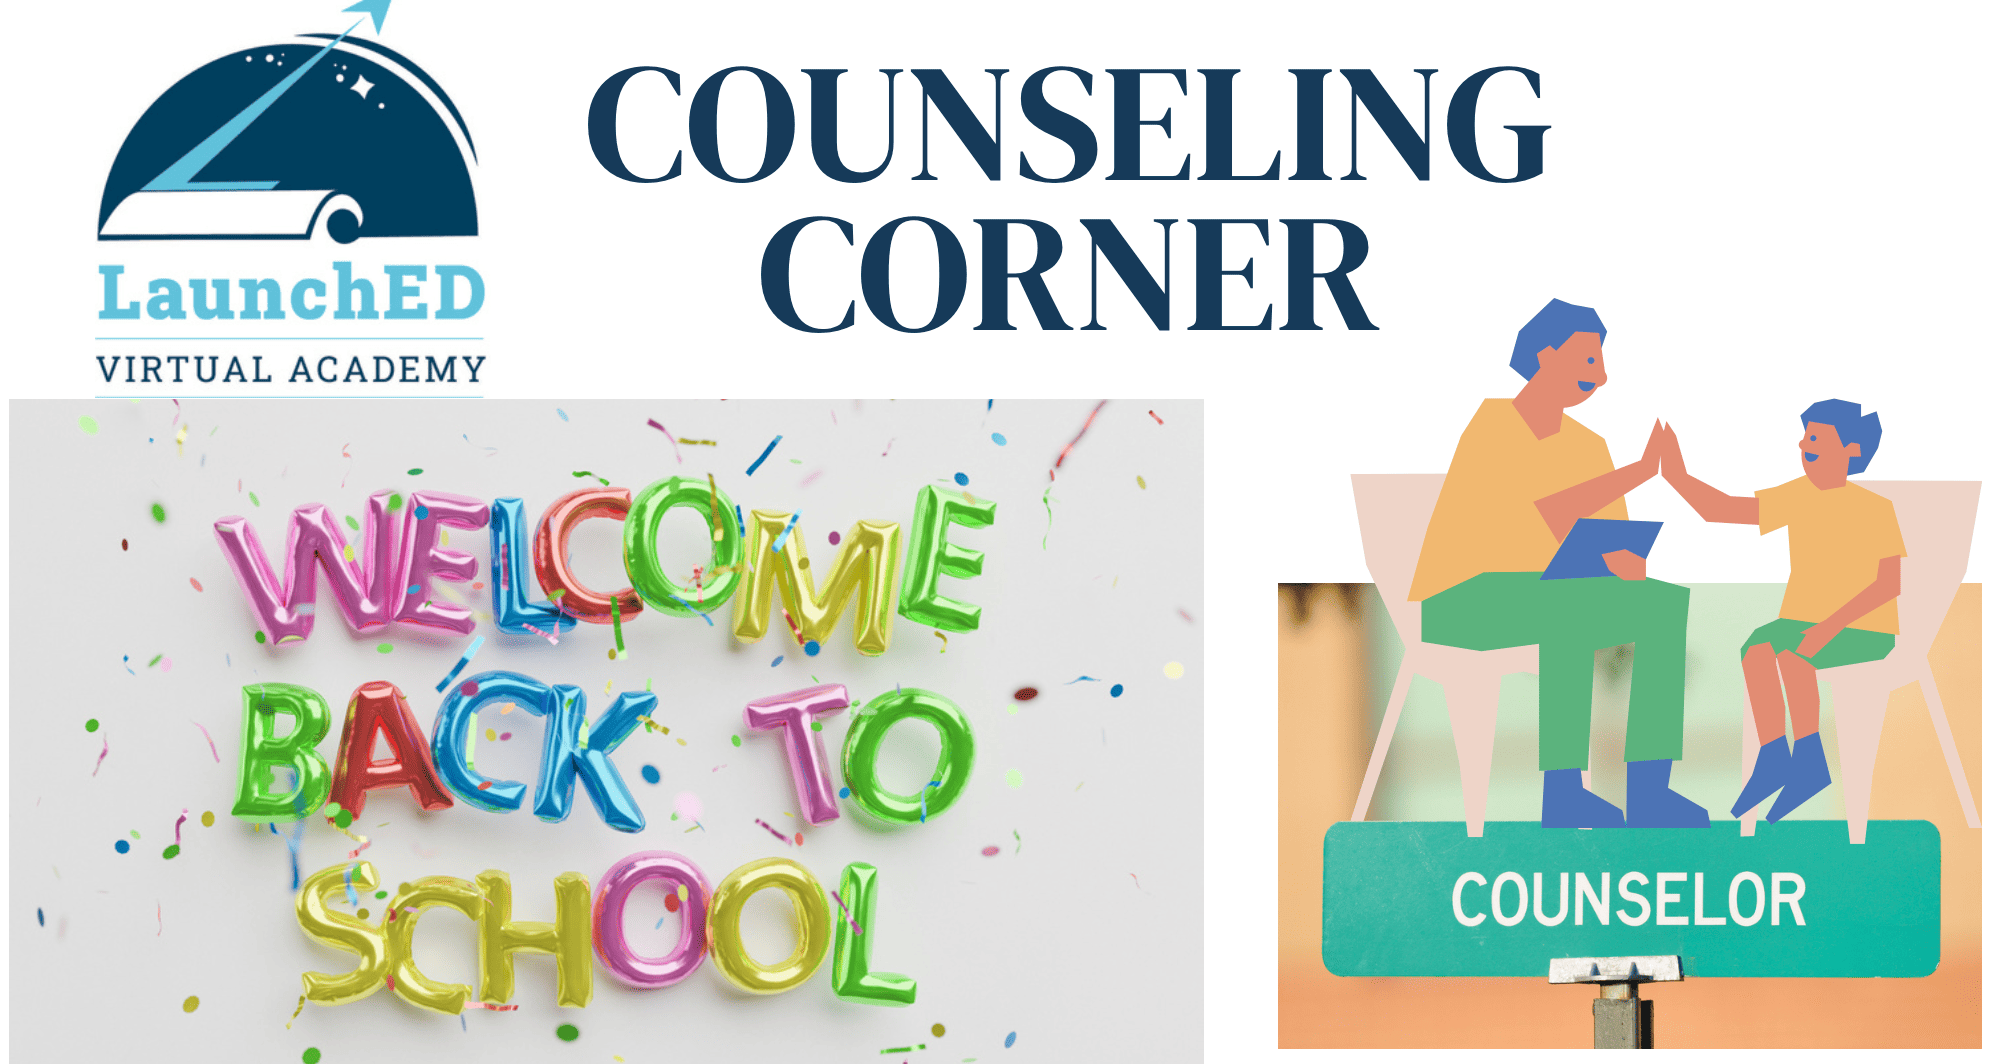 Counseling corner sign with a welcome back to school label and a picture of a student high-fiving an adult.